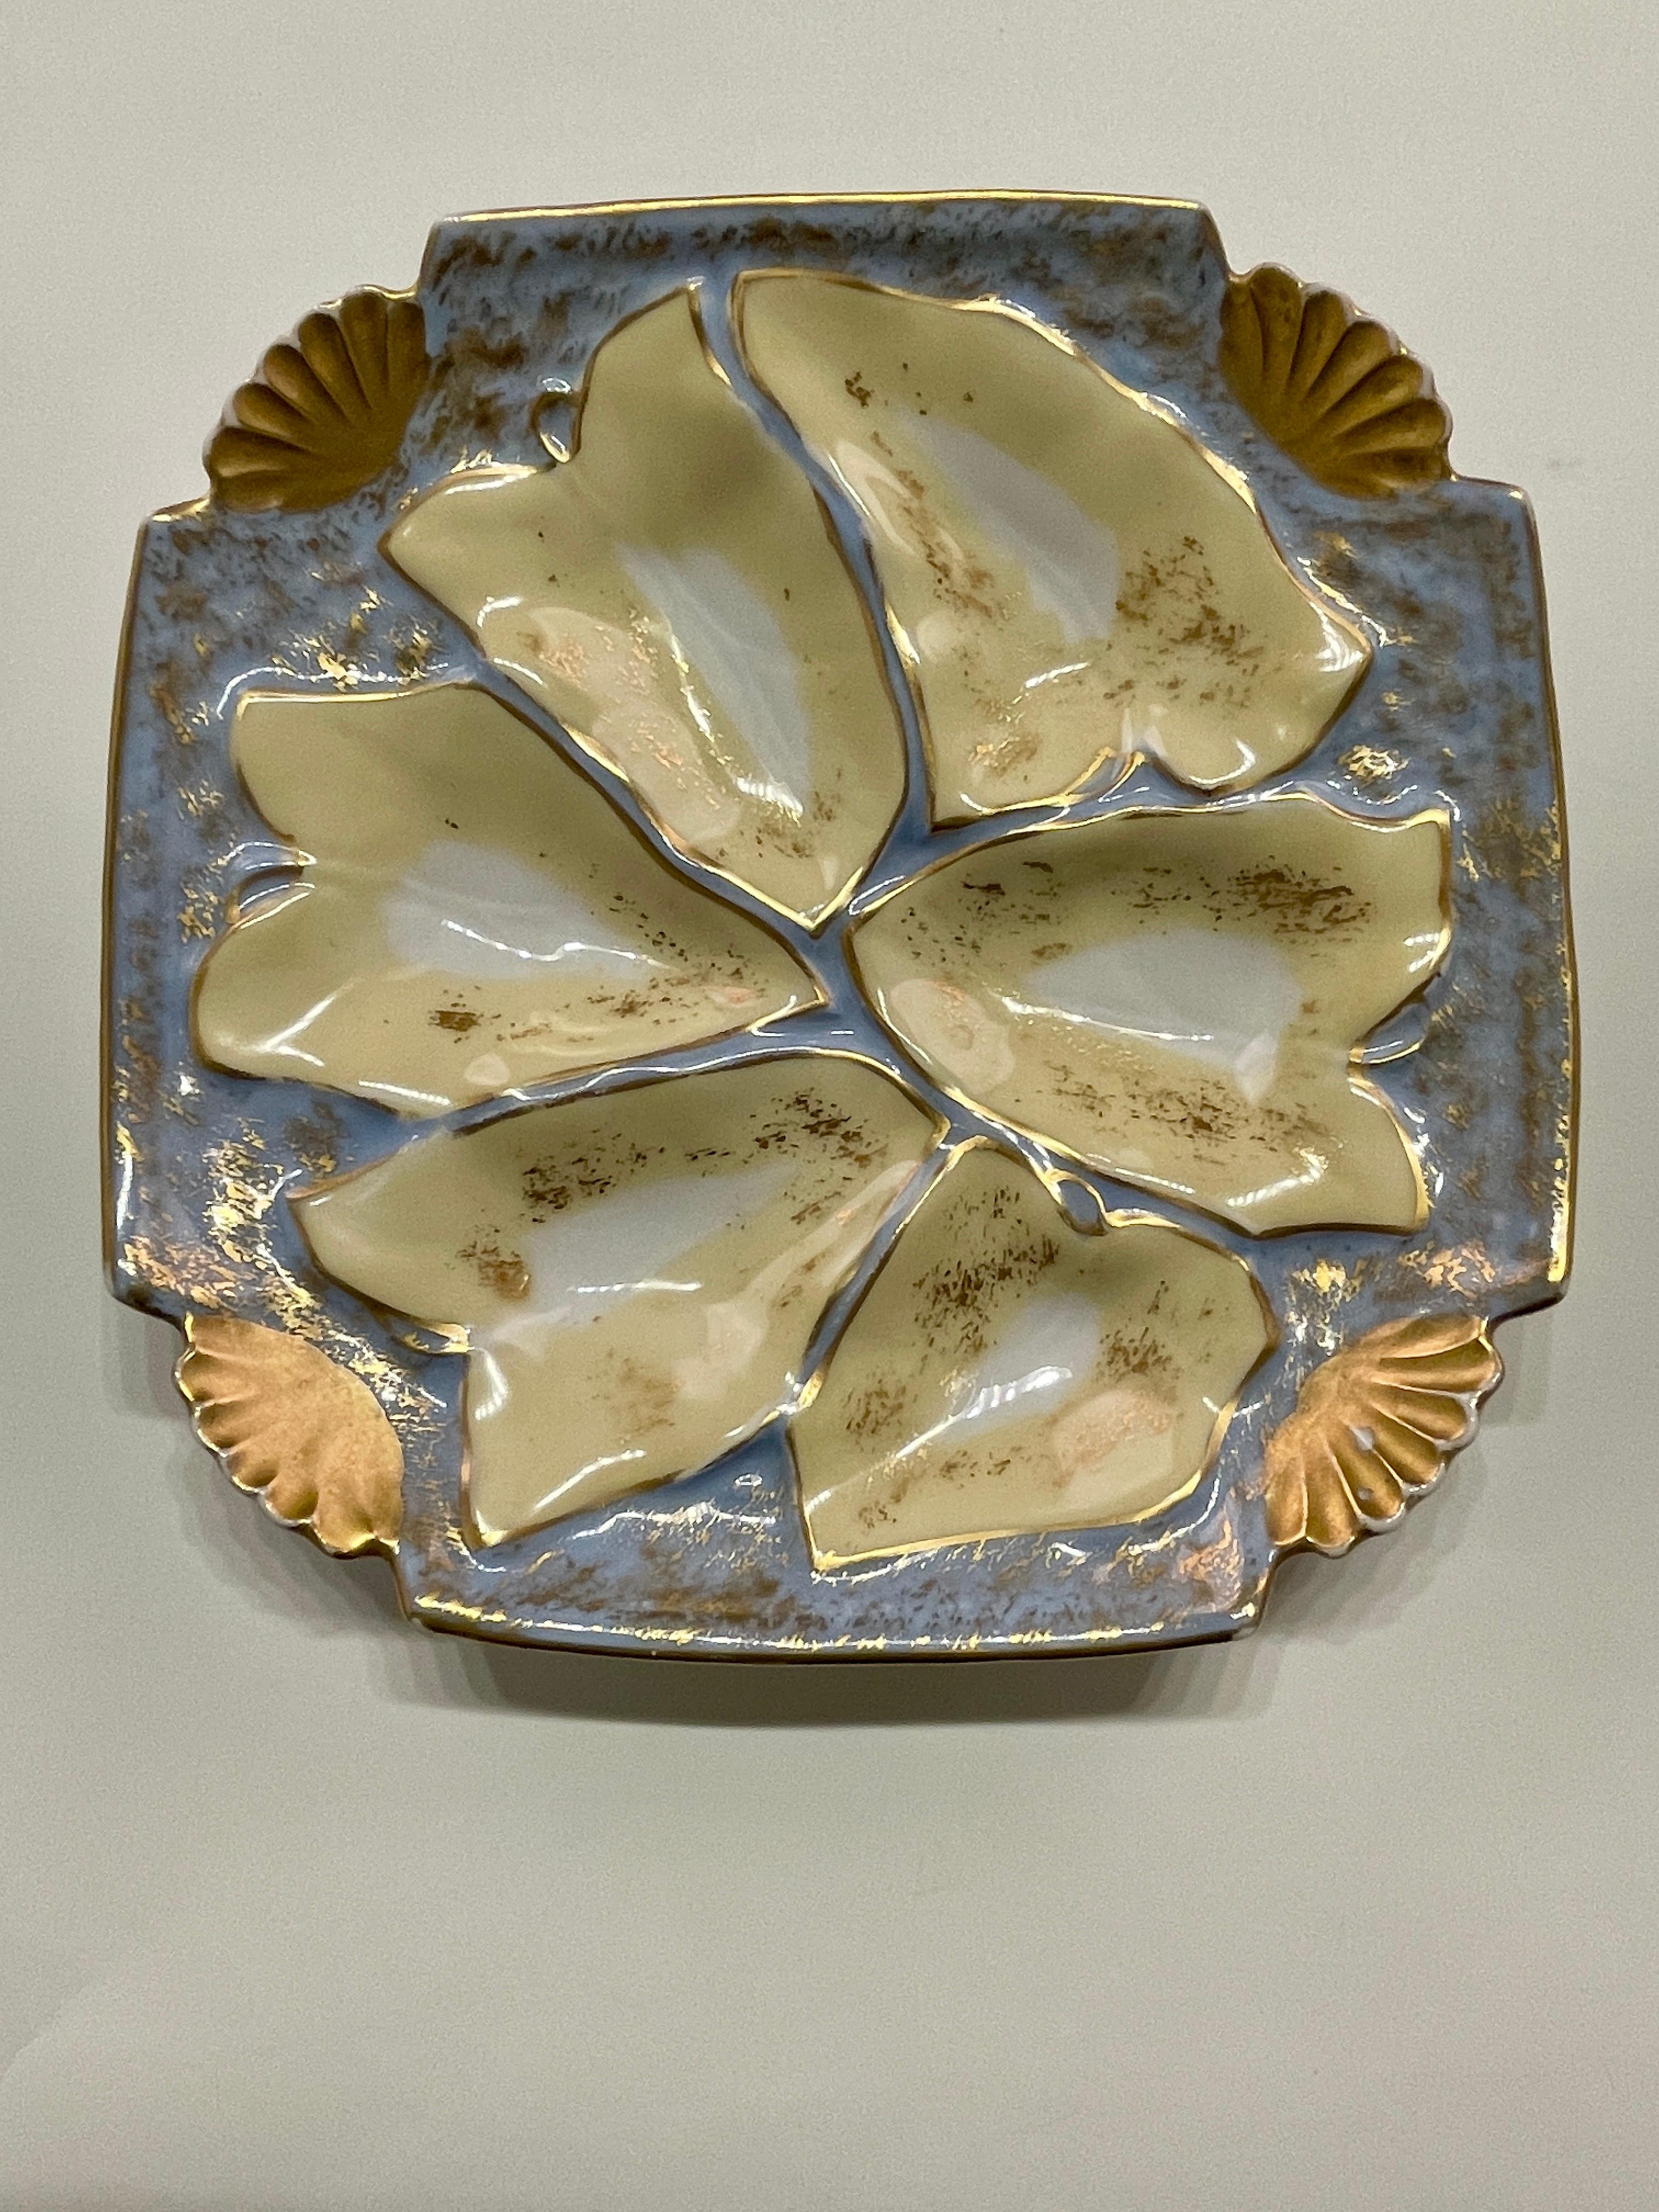 European French Limoges Porcelain Oyster Plate For Sale